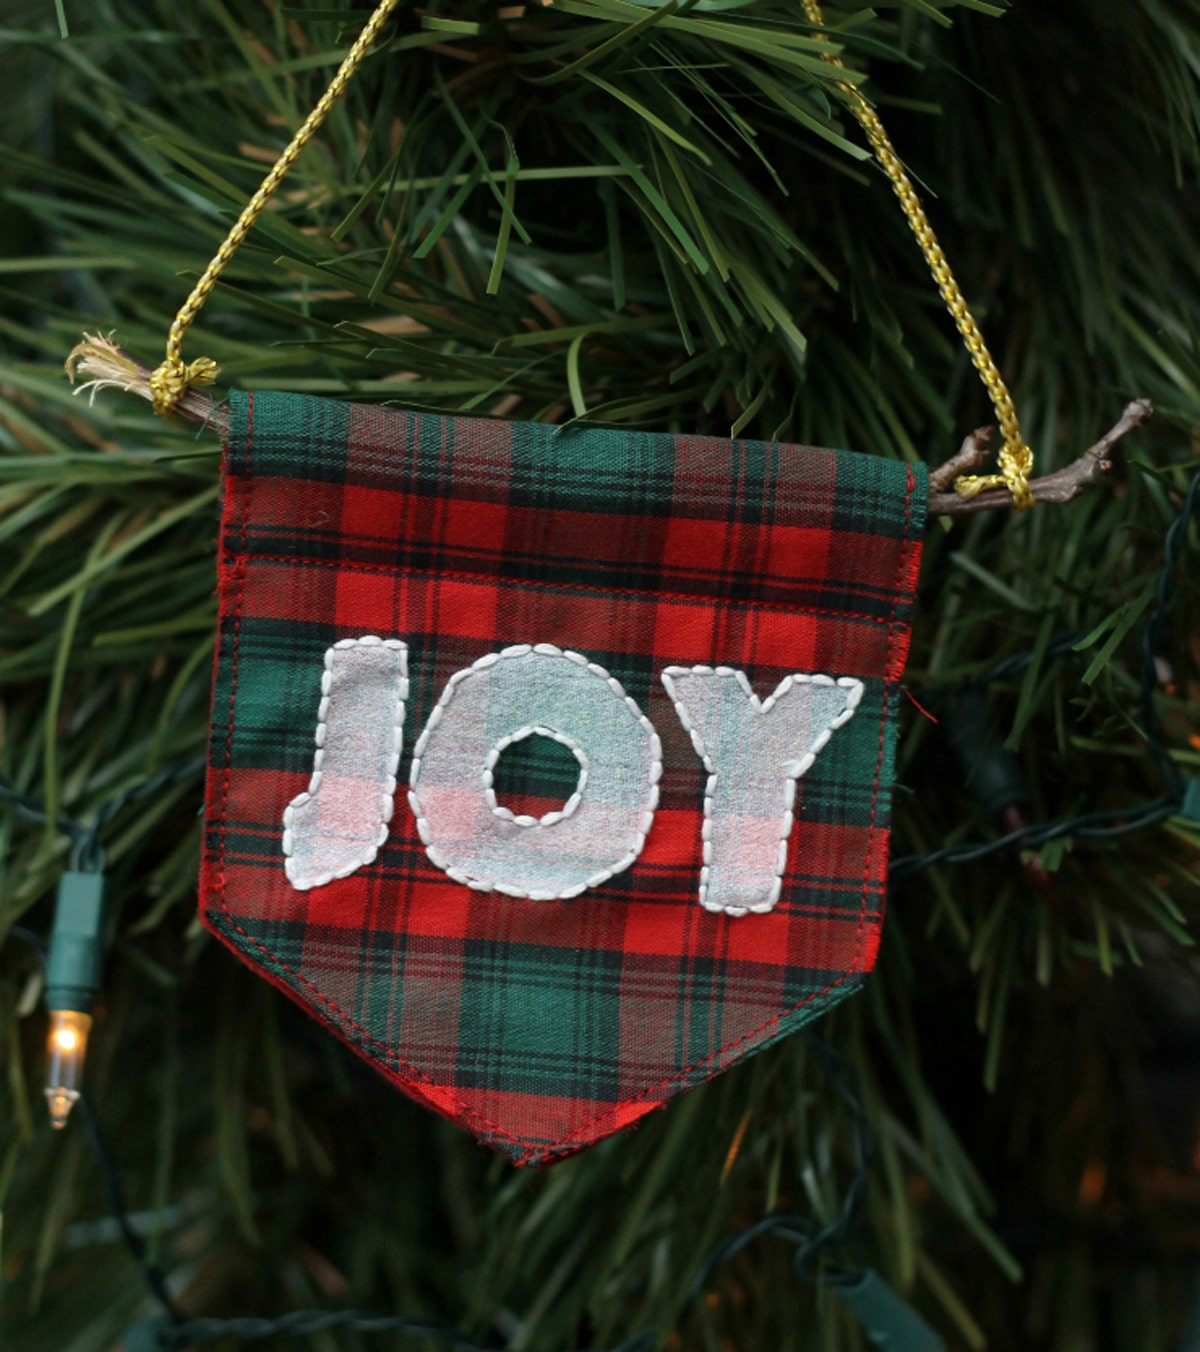 embroidered decorative flags hang on Christmas tree